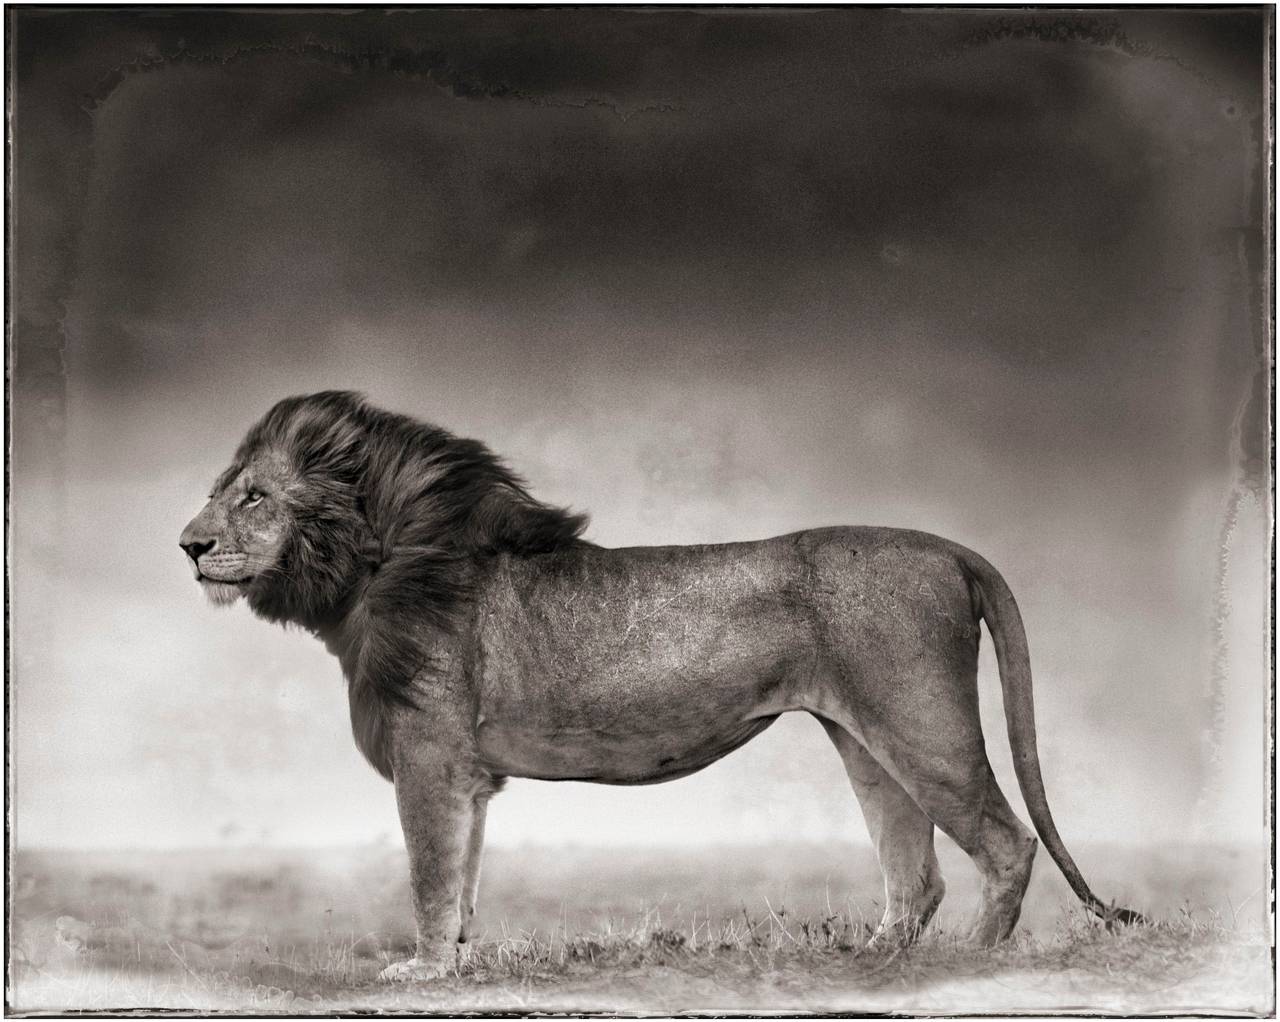 Nick Brandt Black and White Photograph - Portrait of Lion Standing in Wind, Maasai Mara, 2006